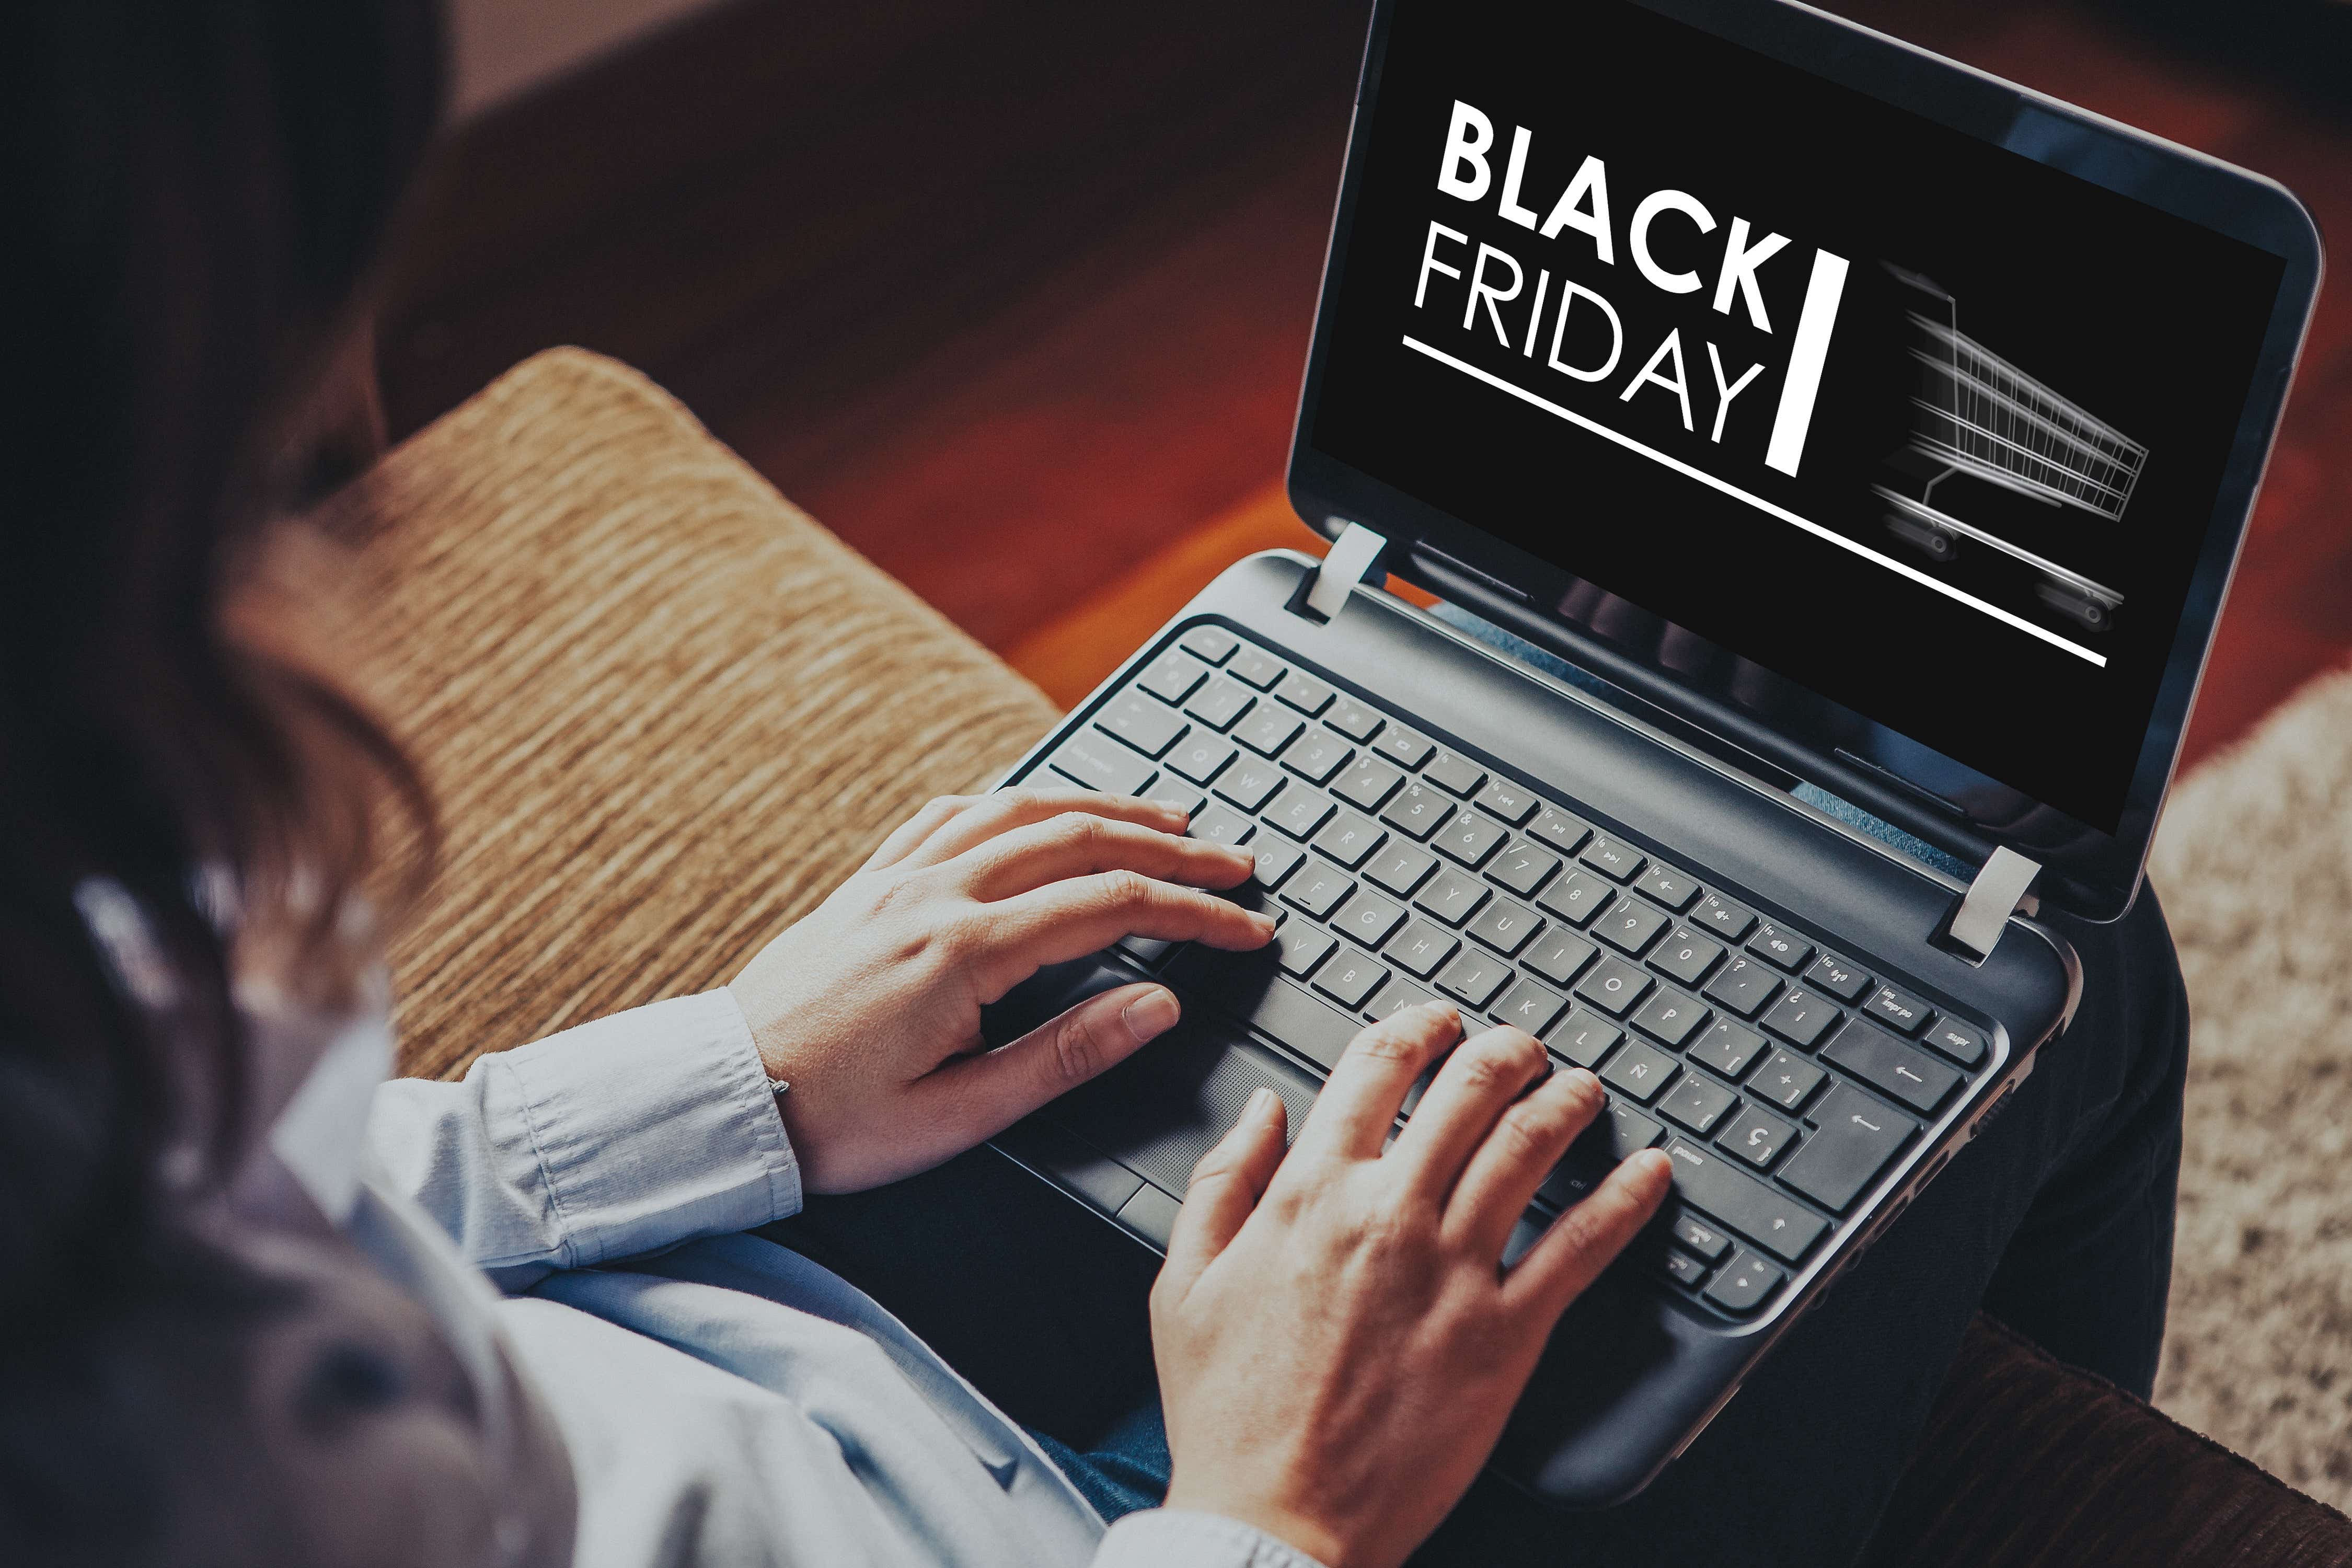 Image of laptop with Black Friday written on in black